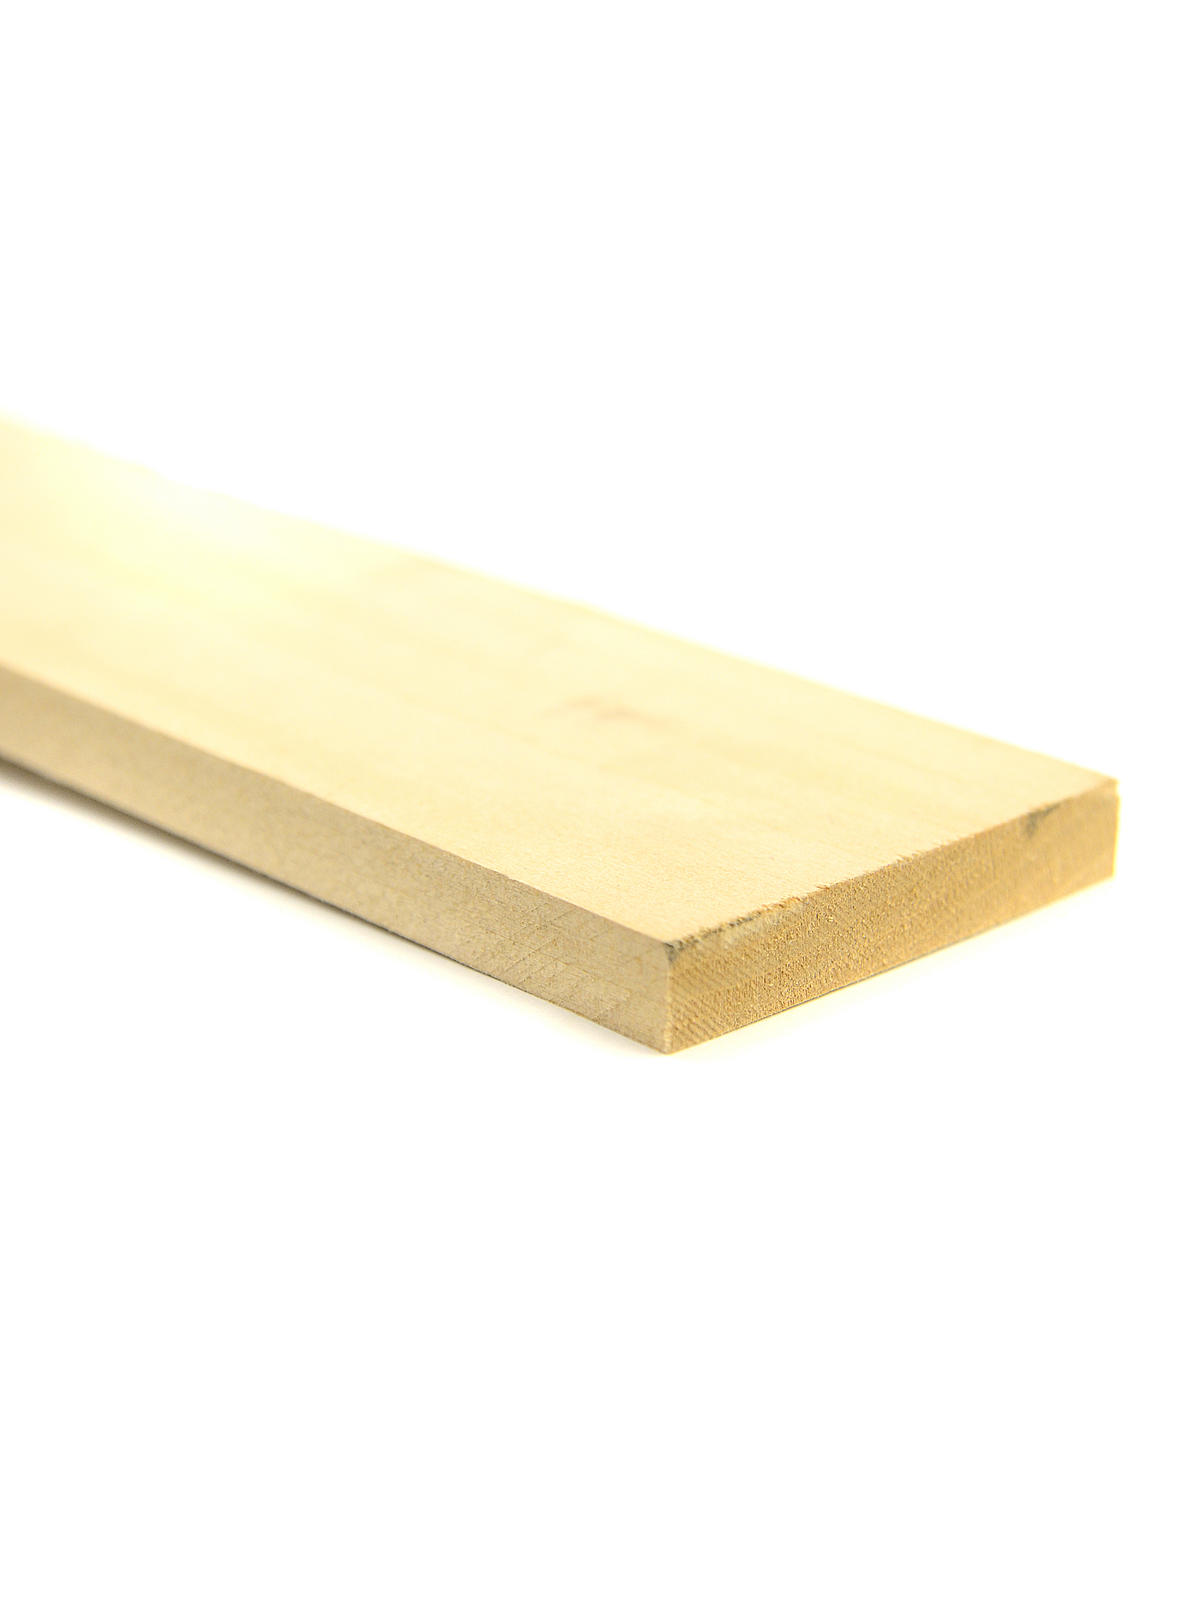 Basswood Sheets 1 2 In. 3 In. X 24 In.